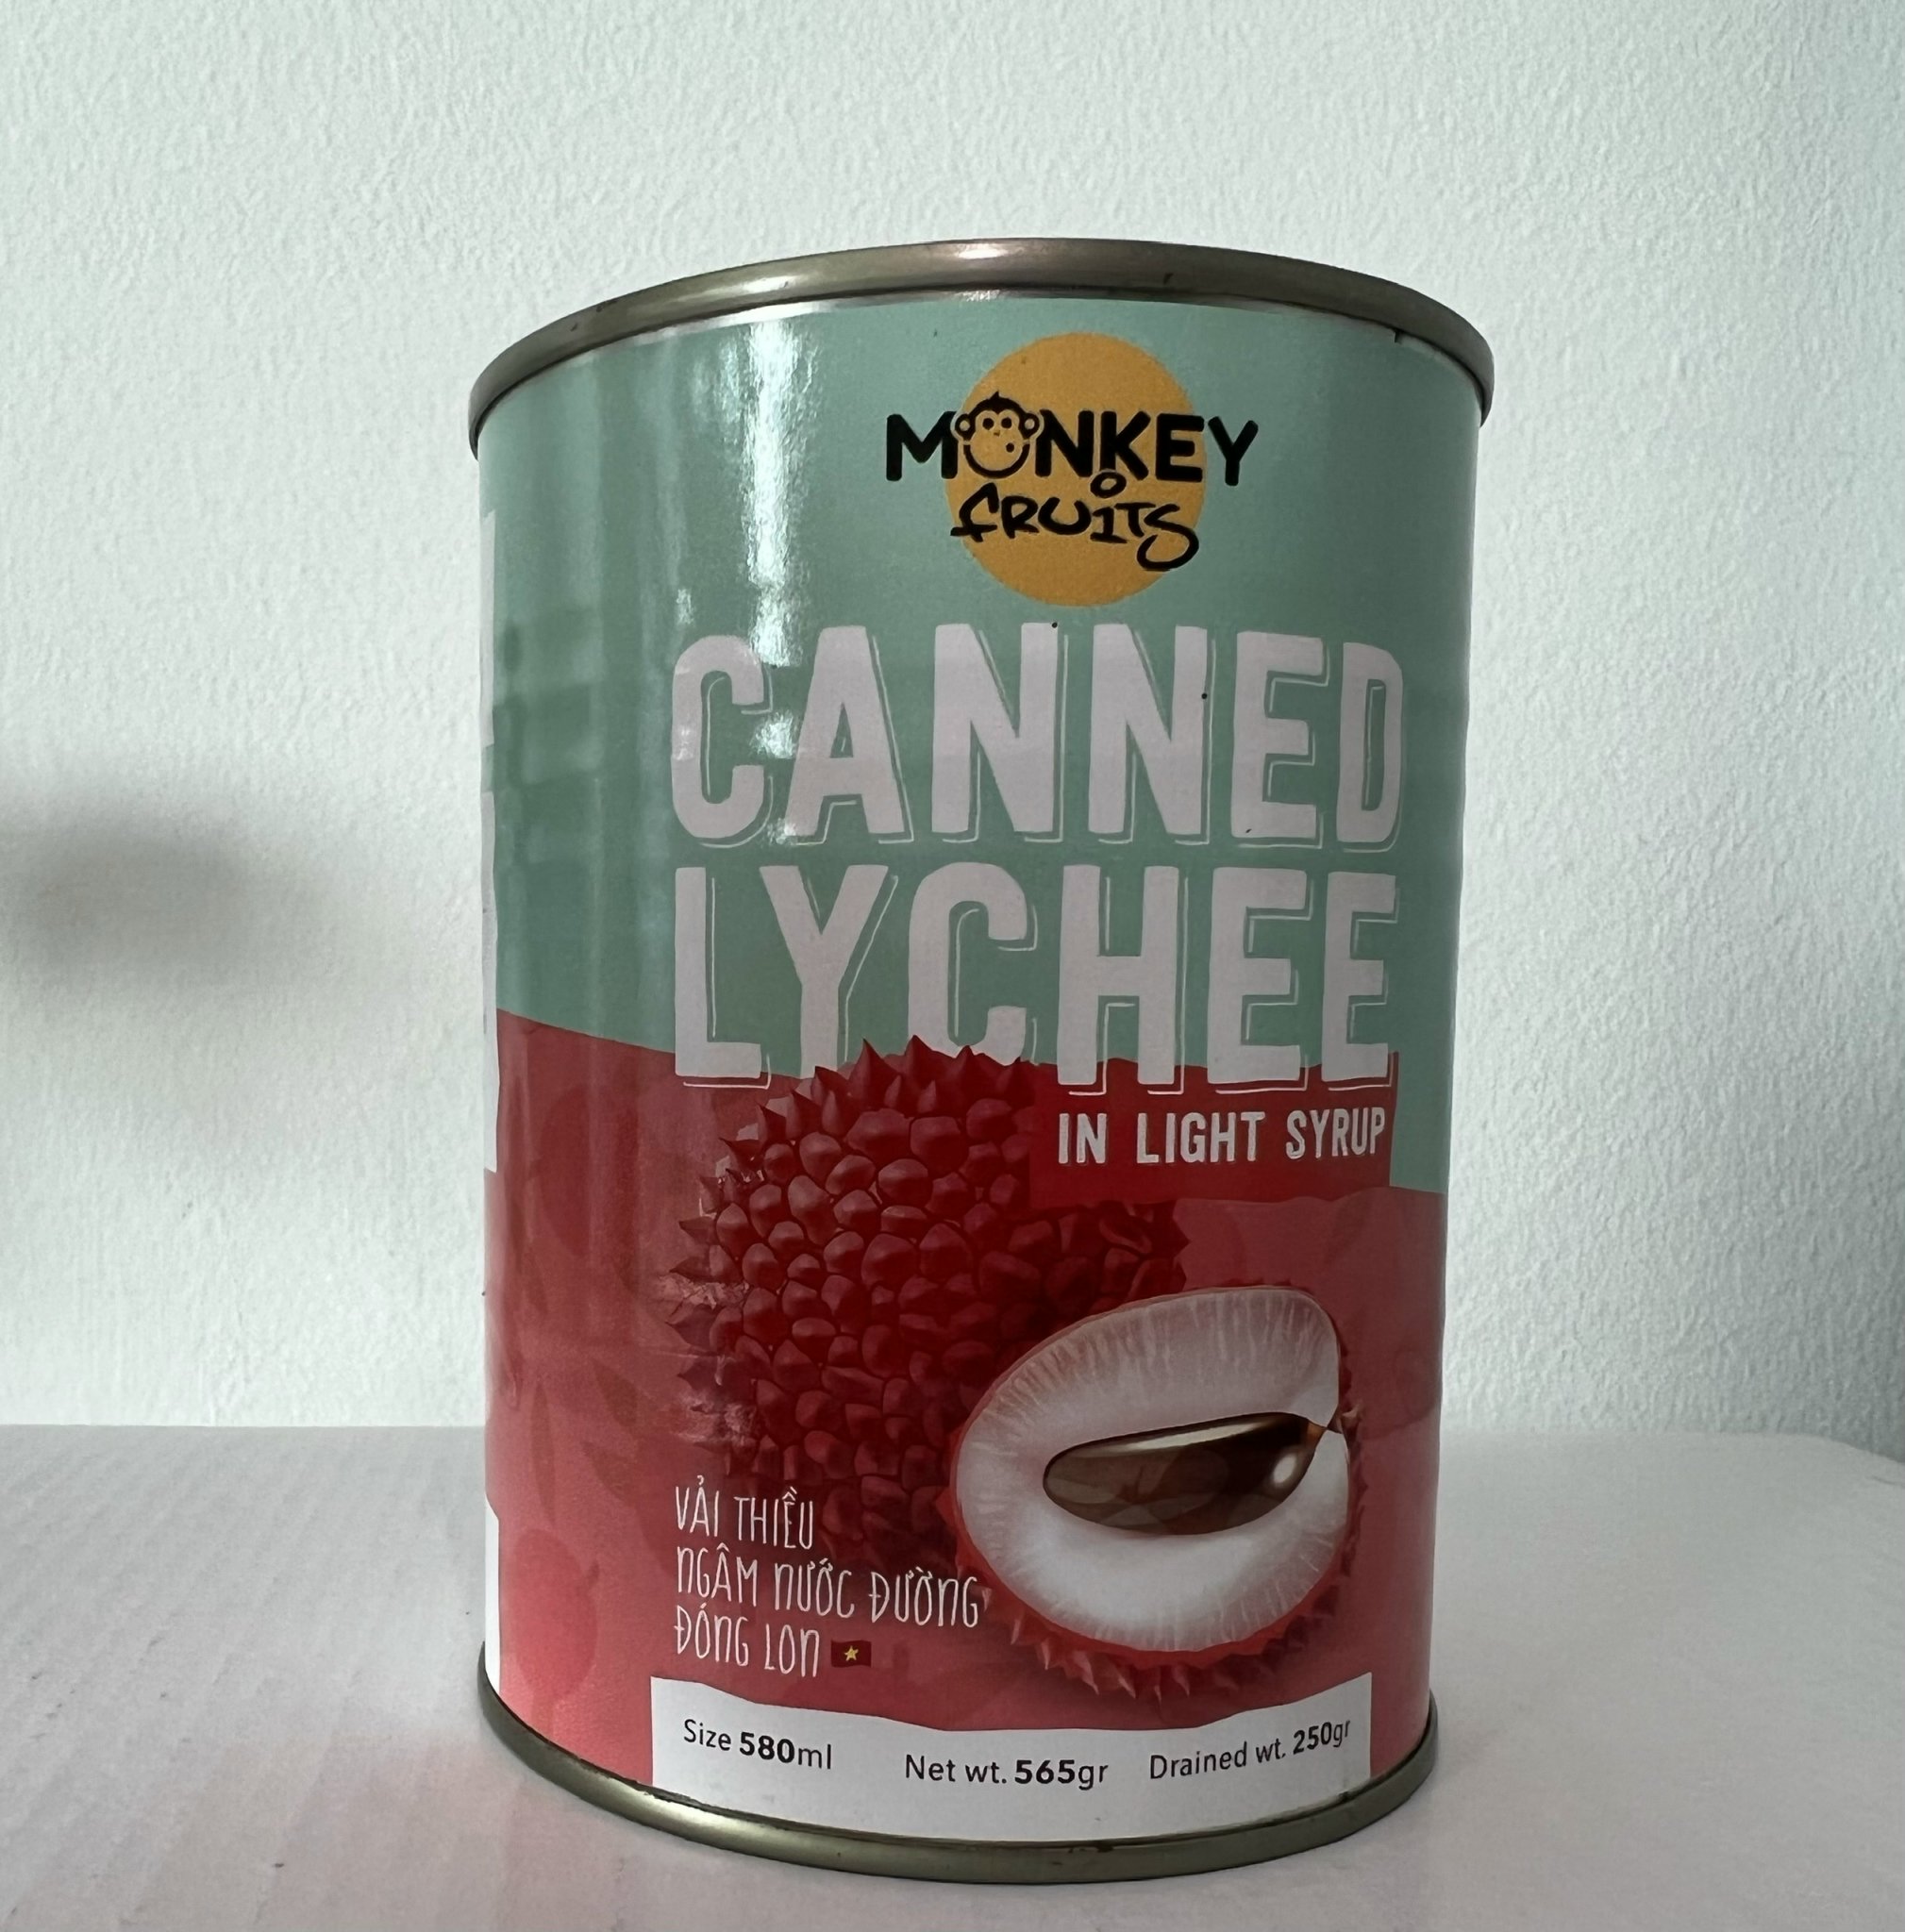 Canned Lychee in light syrup